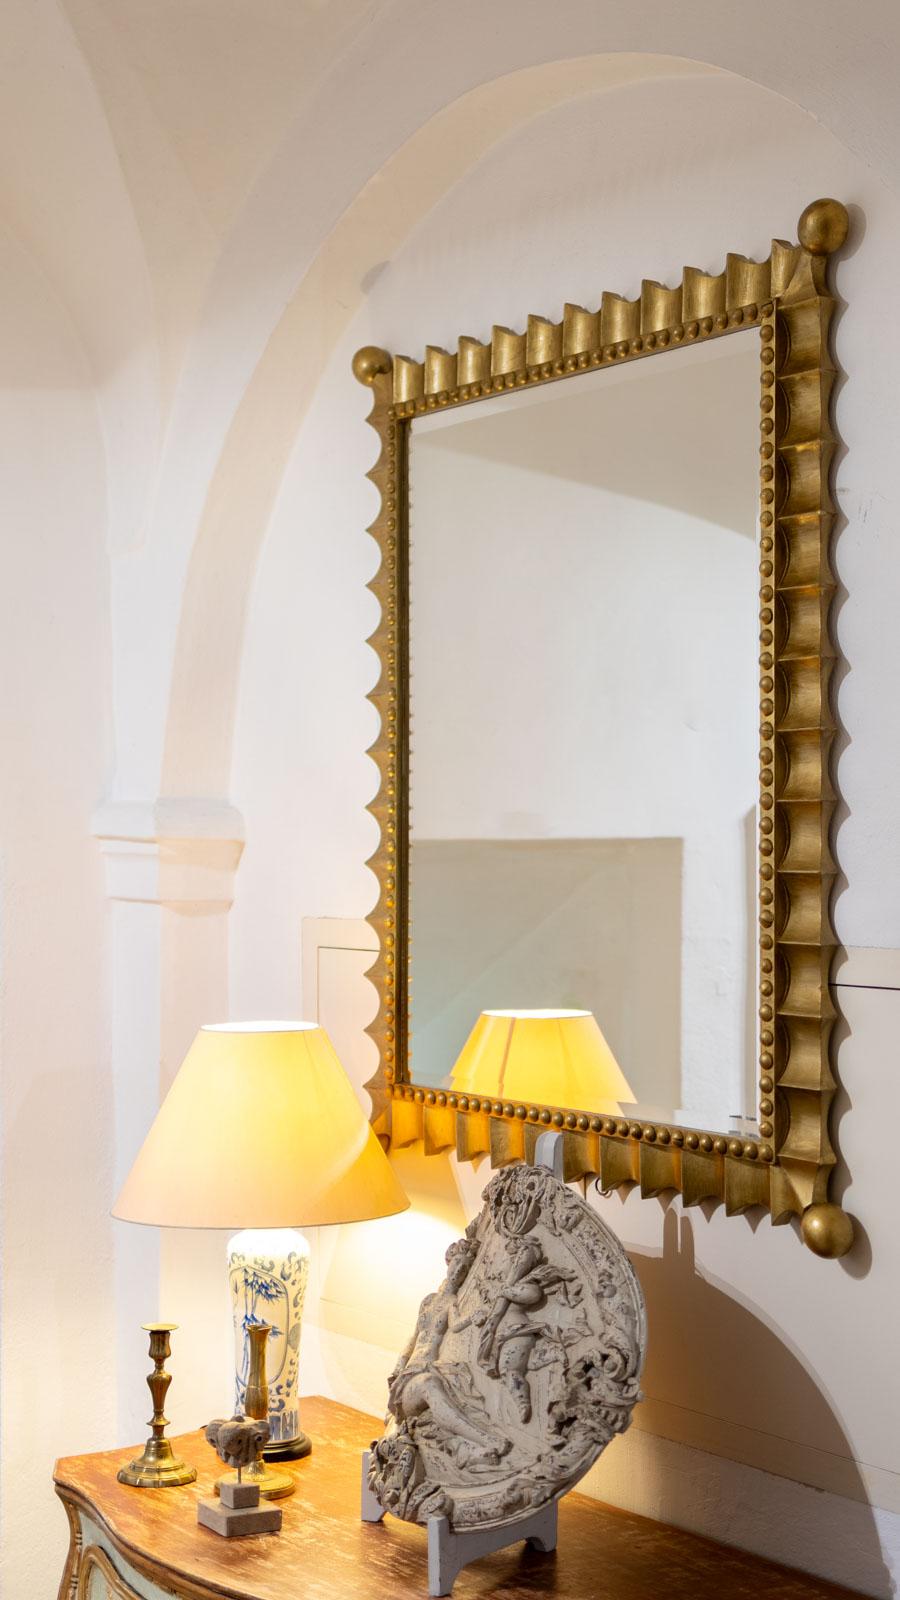 Mid-Century Modern Gold-patinated Scalloped Wall Mirror, Mid-20th Century For Sale